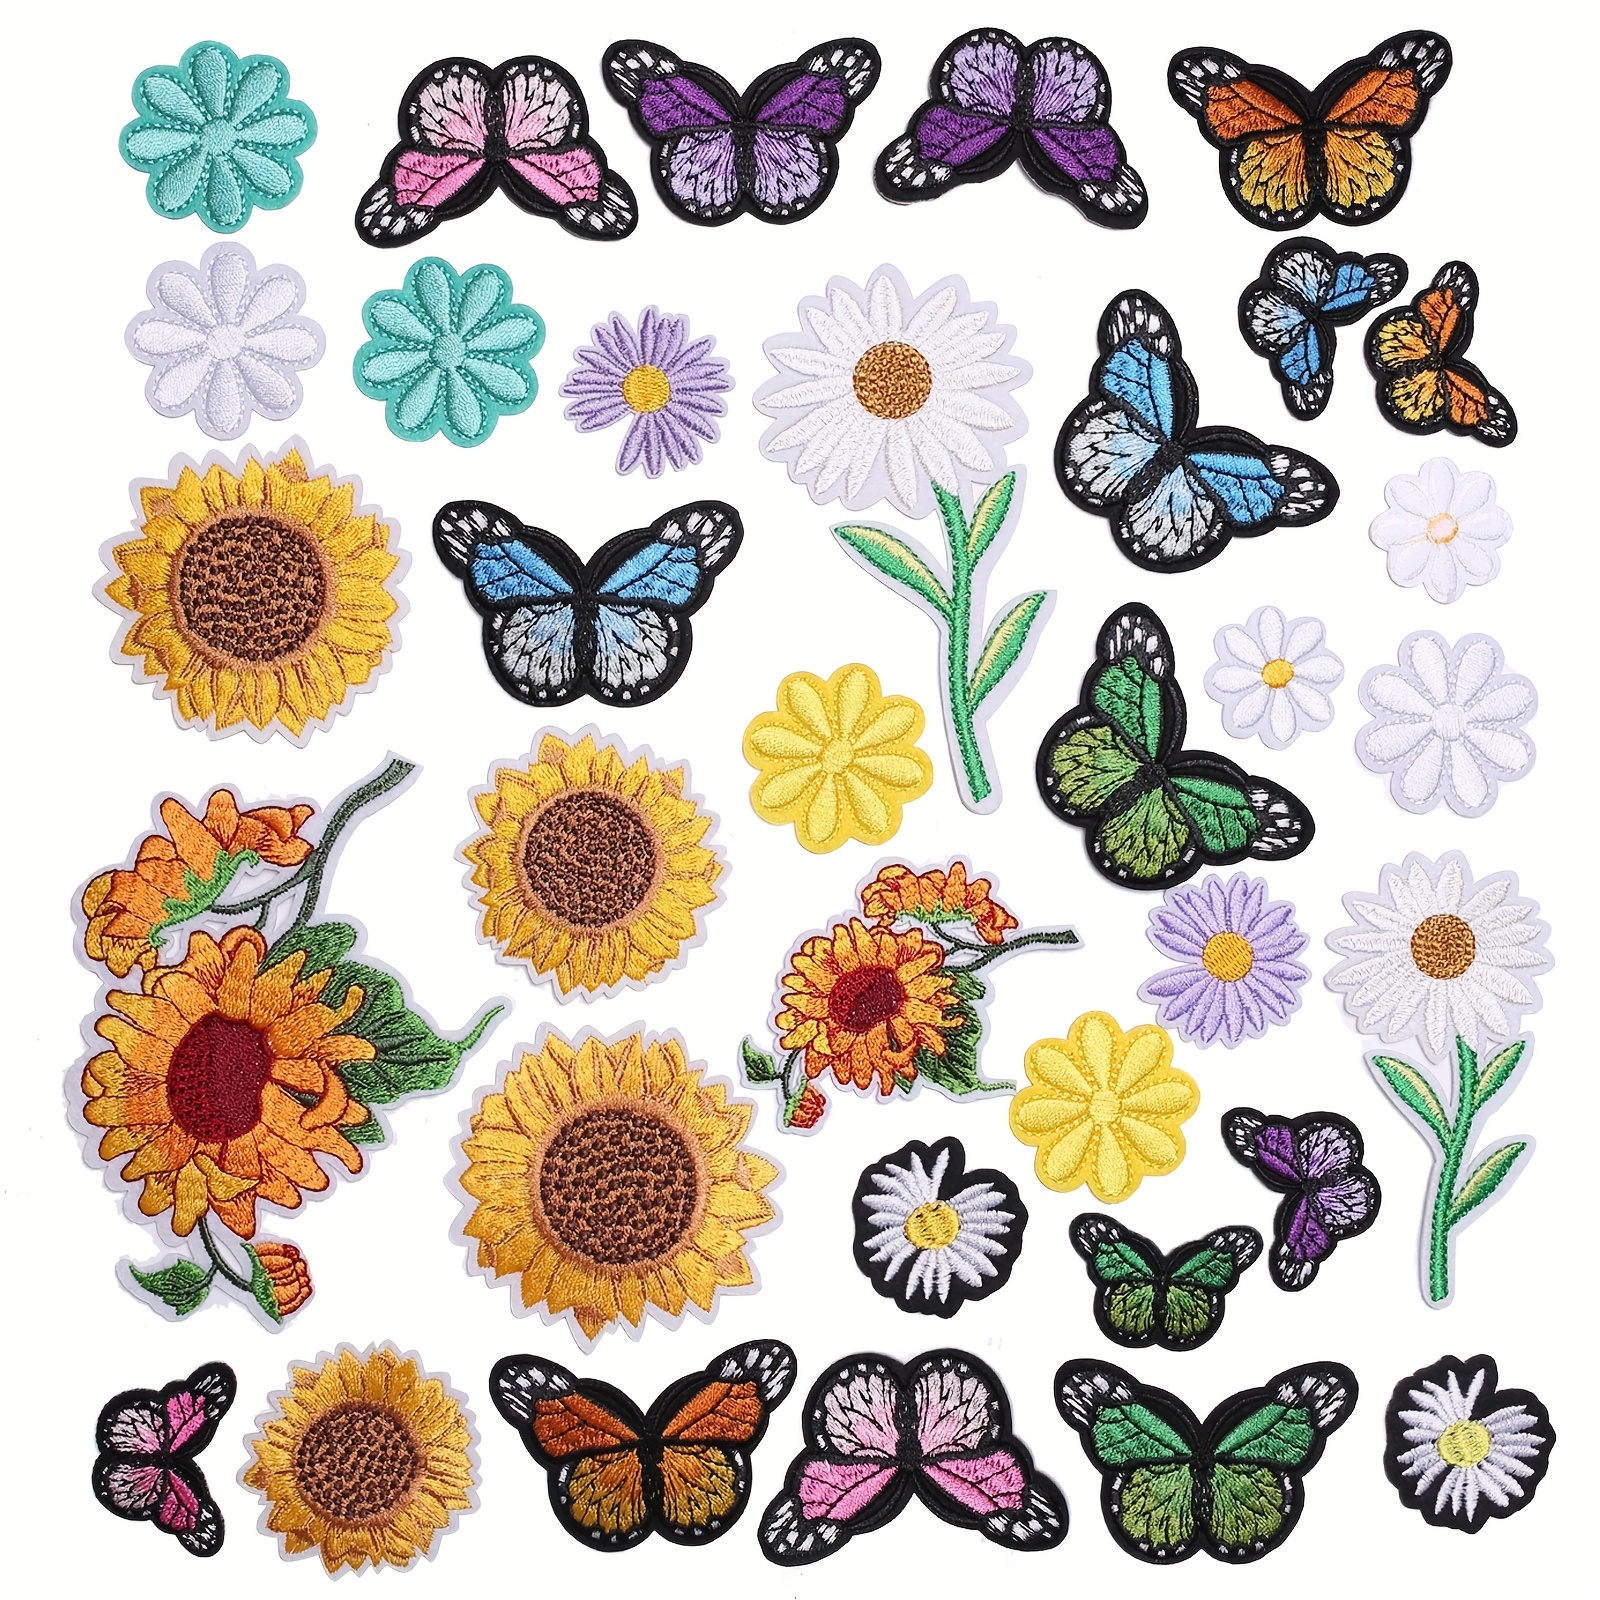  40pcs Butterfly and Flower Iron On Patches, Flower Butterfly  Embroidery Patches Colored Sunflower Floral Iron On Patches Sew On Patches  for Clothes DIY Decoration (40 Styles)